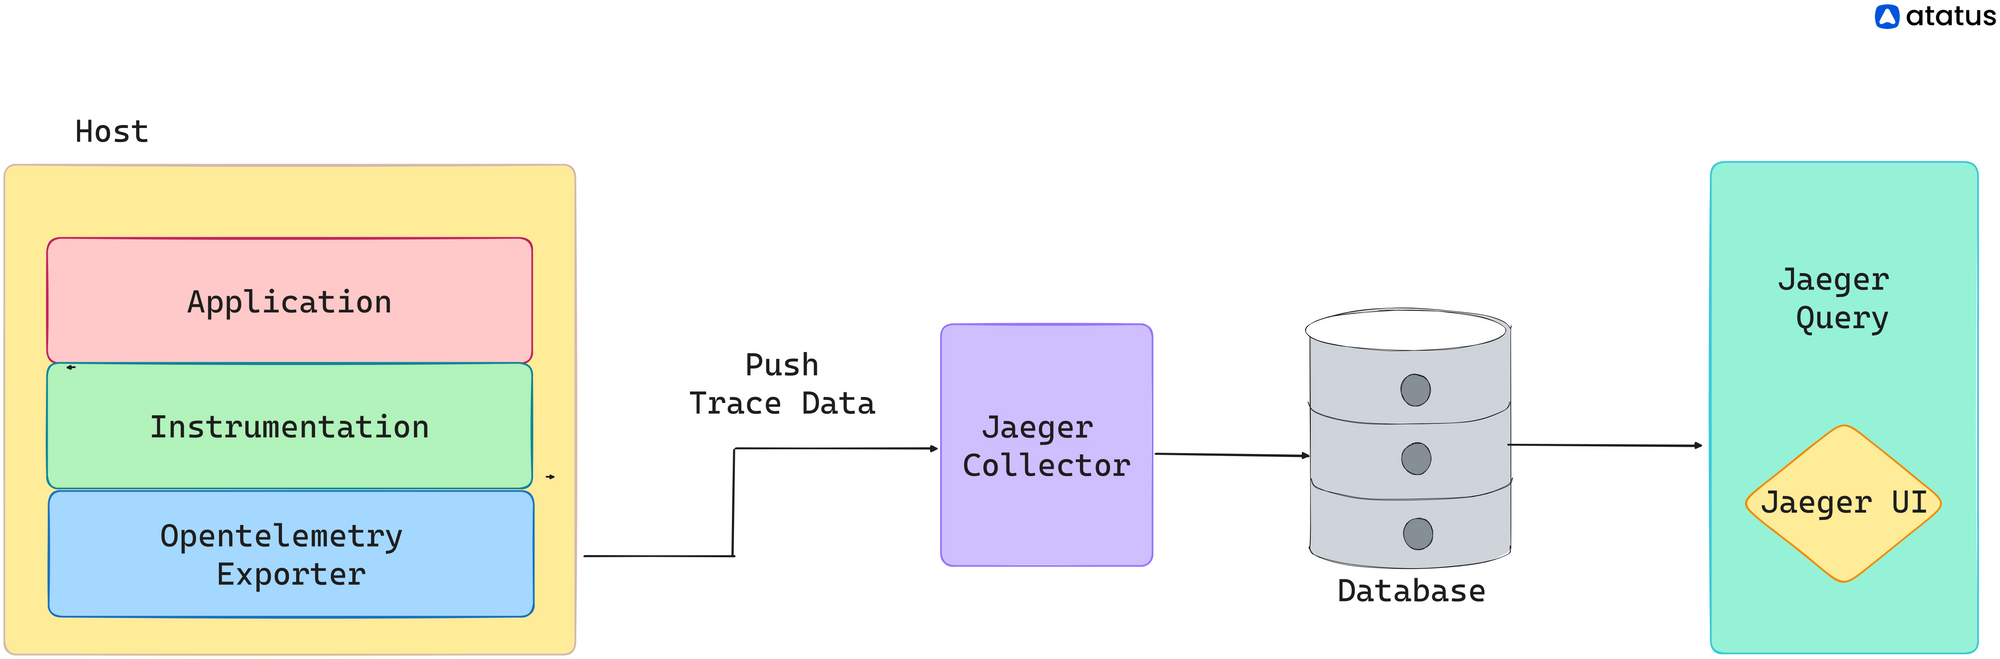 Implementing Jaeger for Distributed Tracing in Microservices